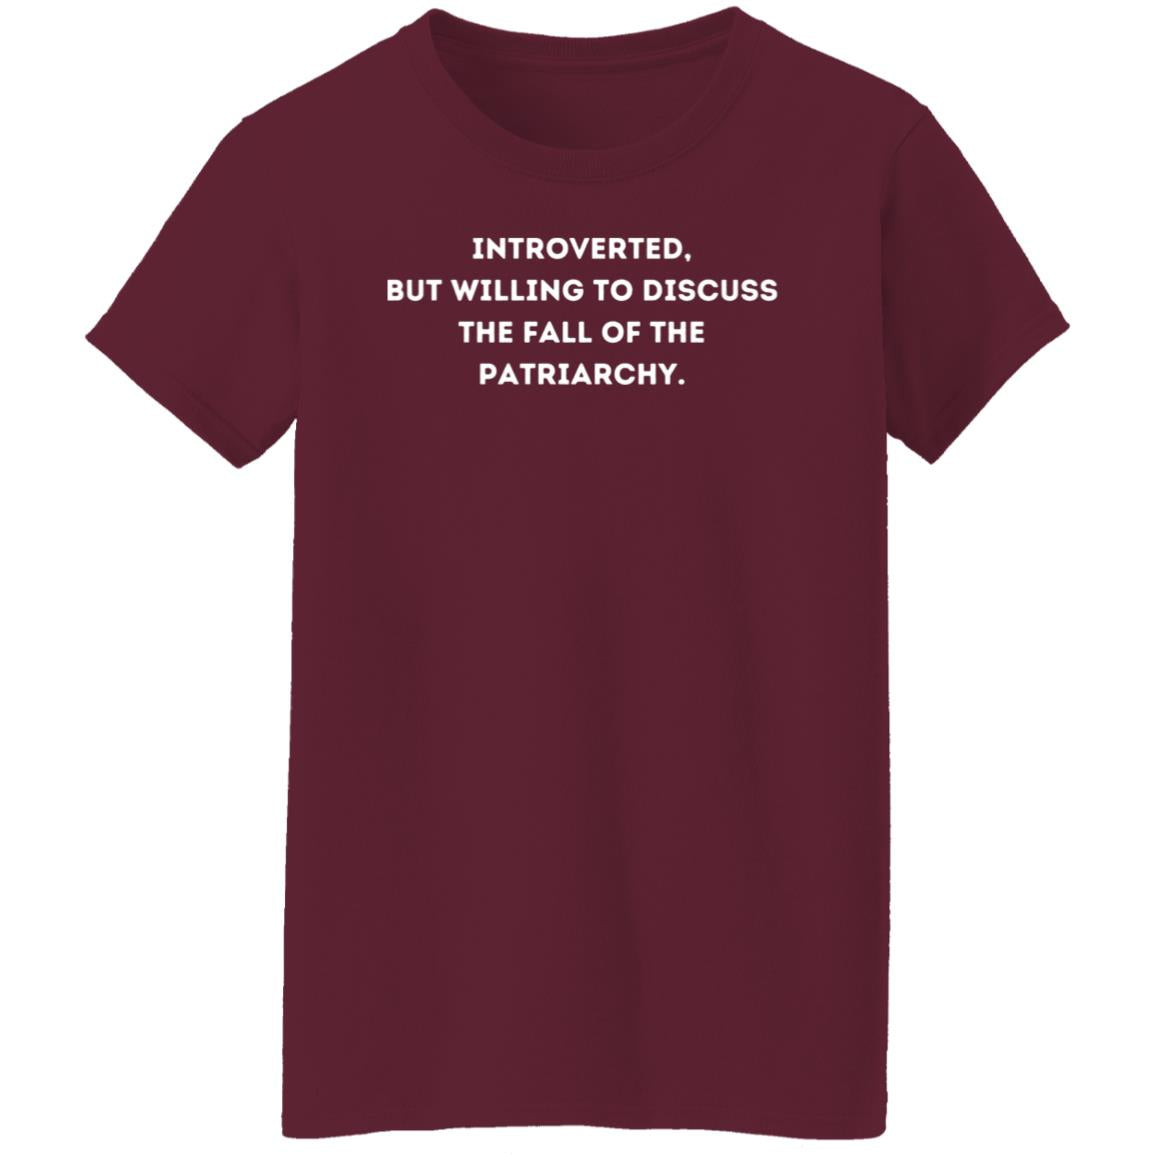 Introverted, but willing to discuss the fall of the patriarchy. T-Shirt